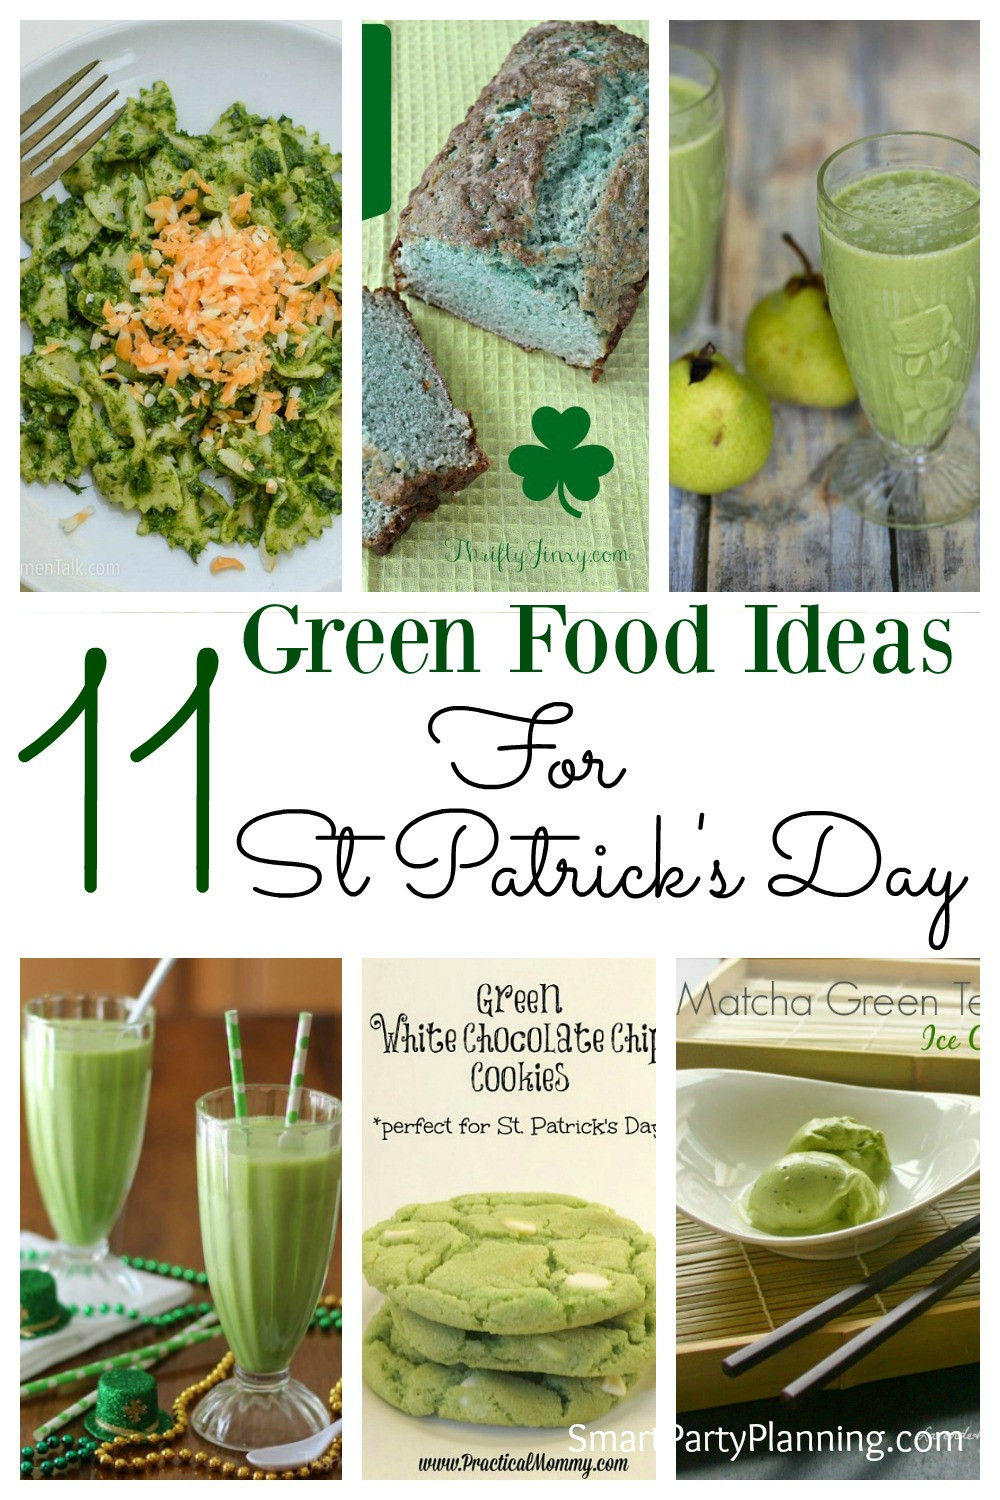 St Patrick Day Food Ideas
 11 Green Food Ideas For St Patrick s Day